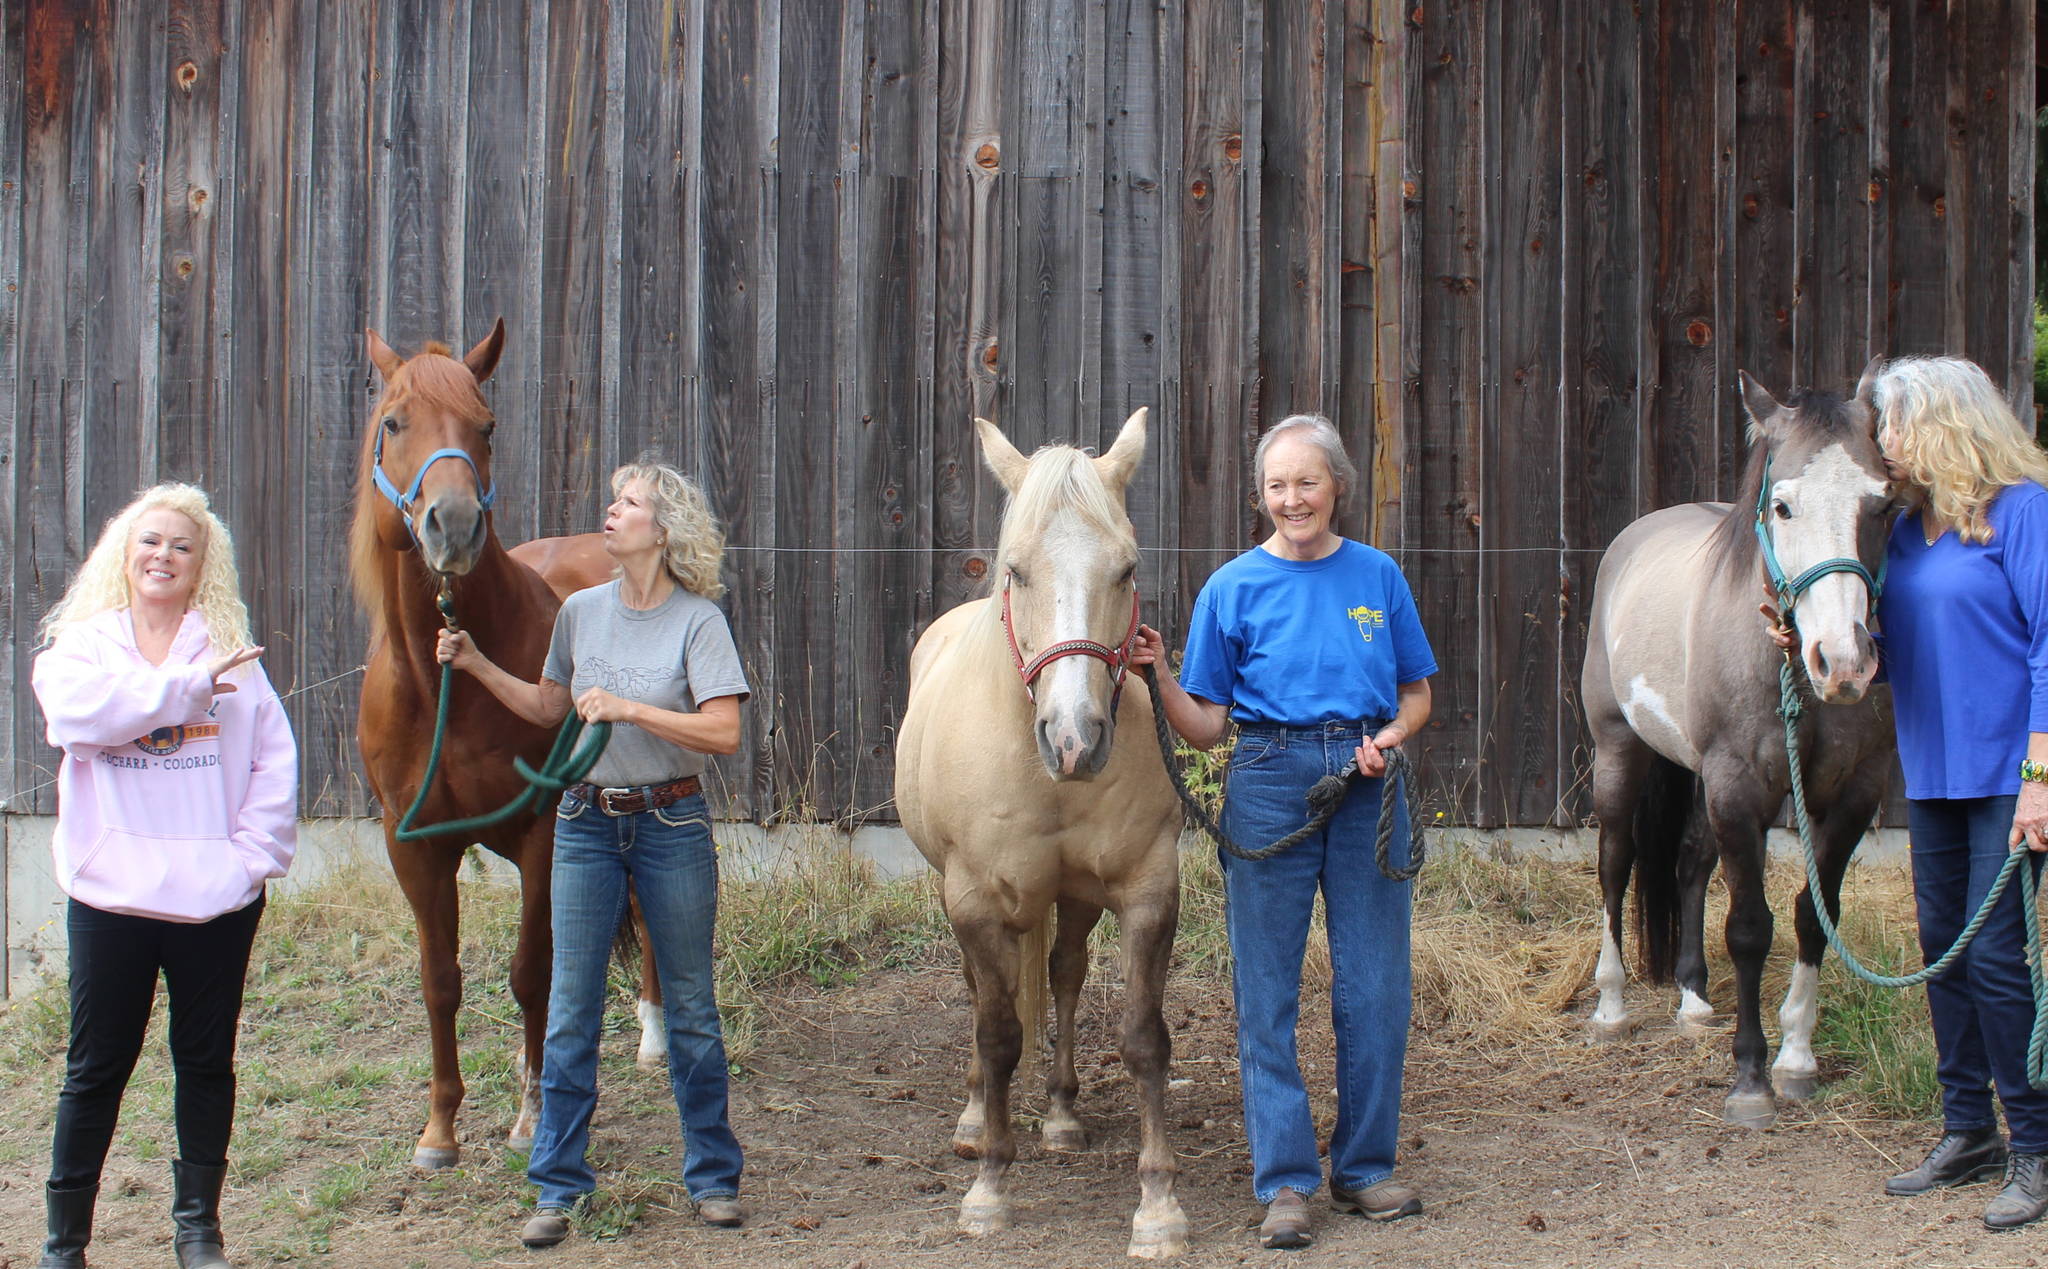 HOPE for the best: Fundraiser for therapeutic horse riding center is Nov. 9